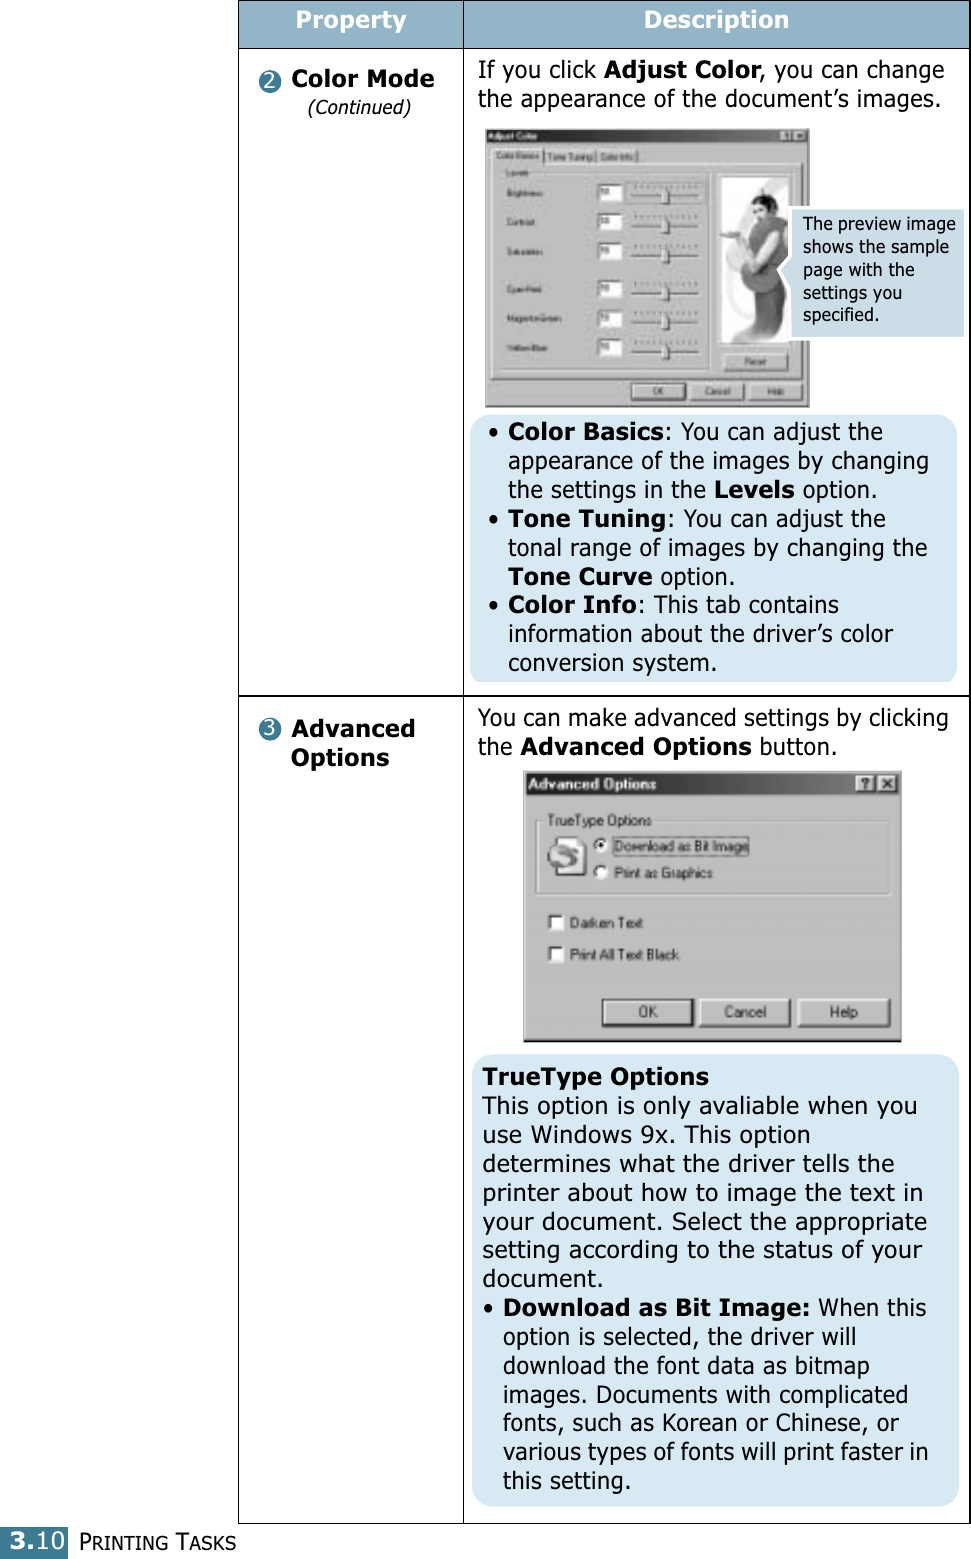 PRINTING TASKS3.10Color Mode(Continued)If you click Adjust Color, you can change the appearance of the document’s images.Advanced     OptionsYou can make advanced settings by clicking the Advanced Options button. Property Description2The preview image shows the sample page with the settings you specified.•Color Basics: You can adjust the  appearance of the images by changing the settings in the Levels option.•Tone Tuning: You can adjust the tonal range of images by changing the Tone Curve option.•Color Info: This tab contains information about the driver’s color conversion system.3TrueType OptionsThis option is only avaliable when you  use Windows 9x. This option determines what the driver tells the printer about how to image the text in your document. Select the appropriate setting according to the status of your document.•Download as Bit Image: When this option is selected, the driver will download the font data as bitmap images. Documents with complicated fonts, such as Korean or Chinese, or various types of fonts will print faster in this setting.